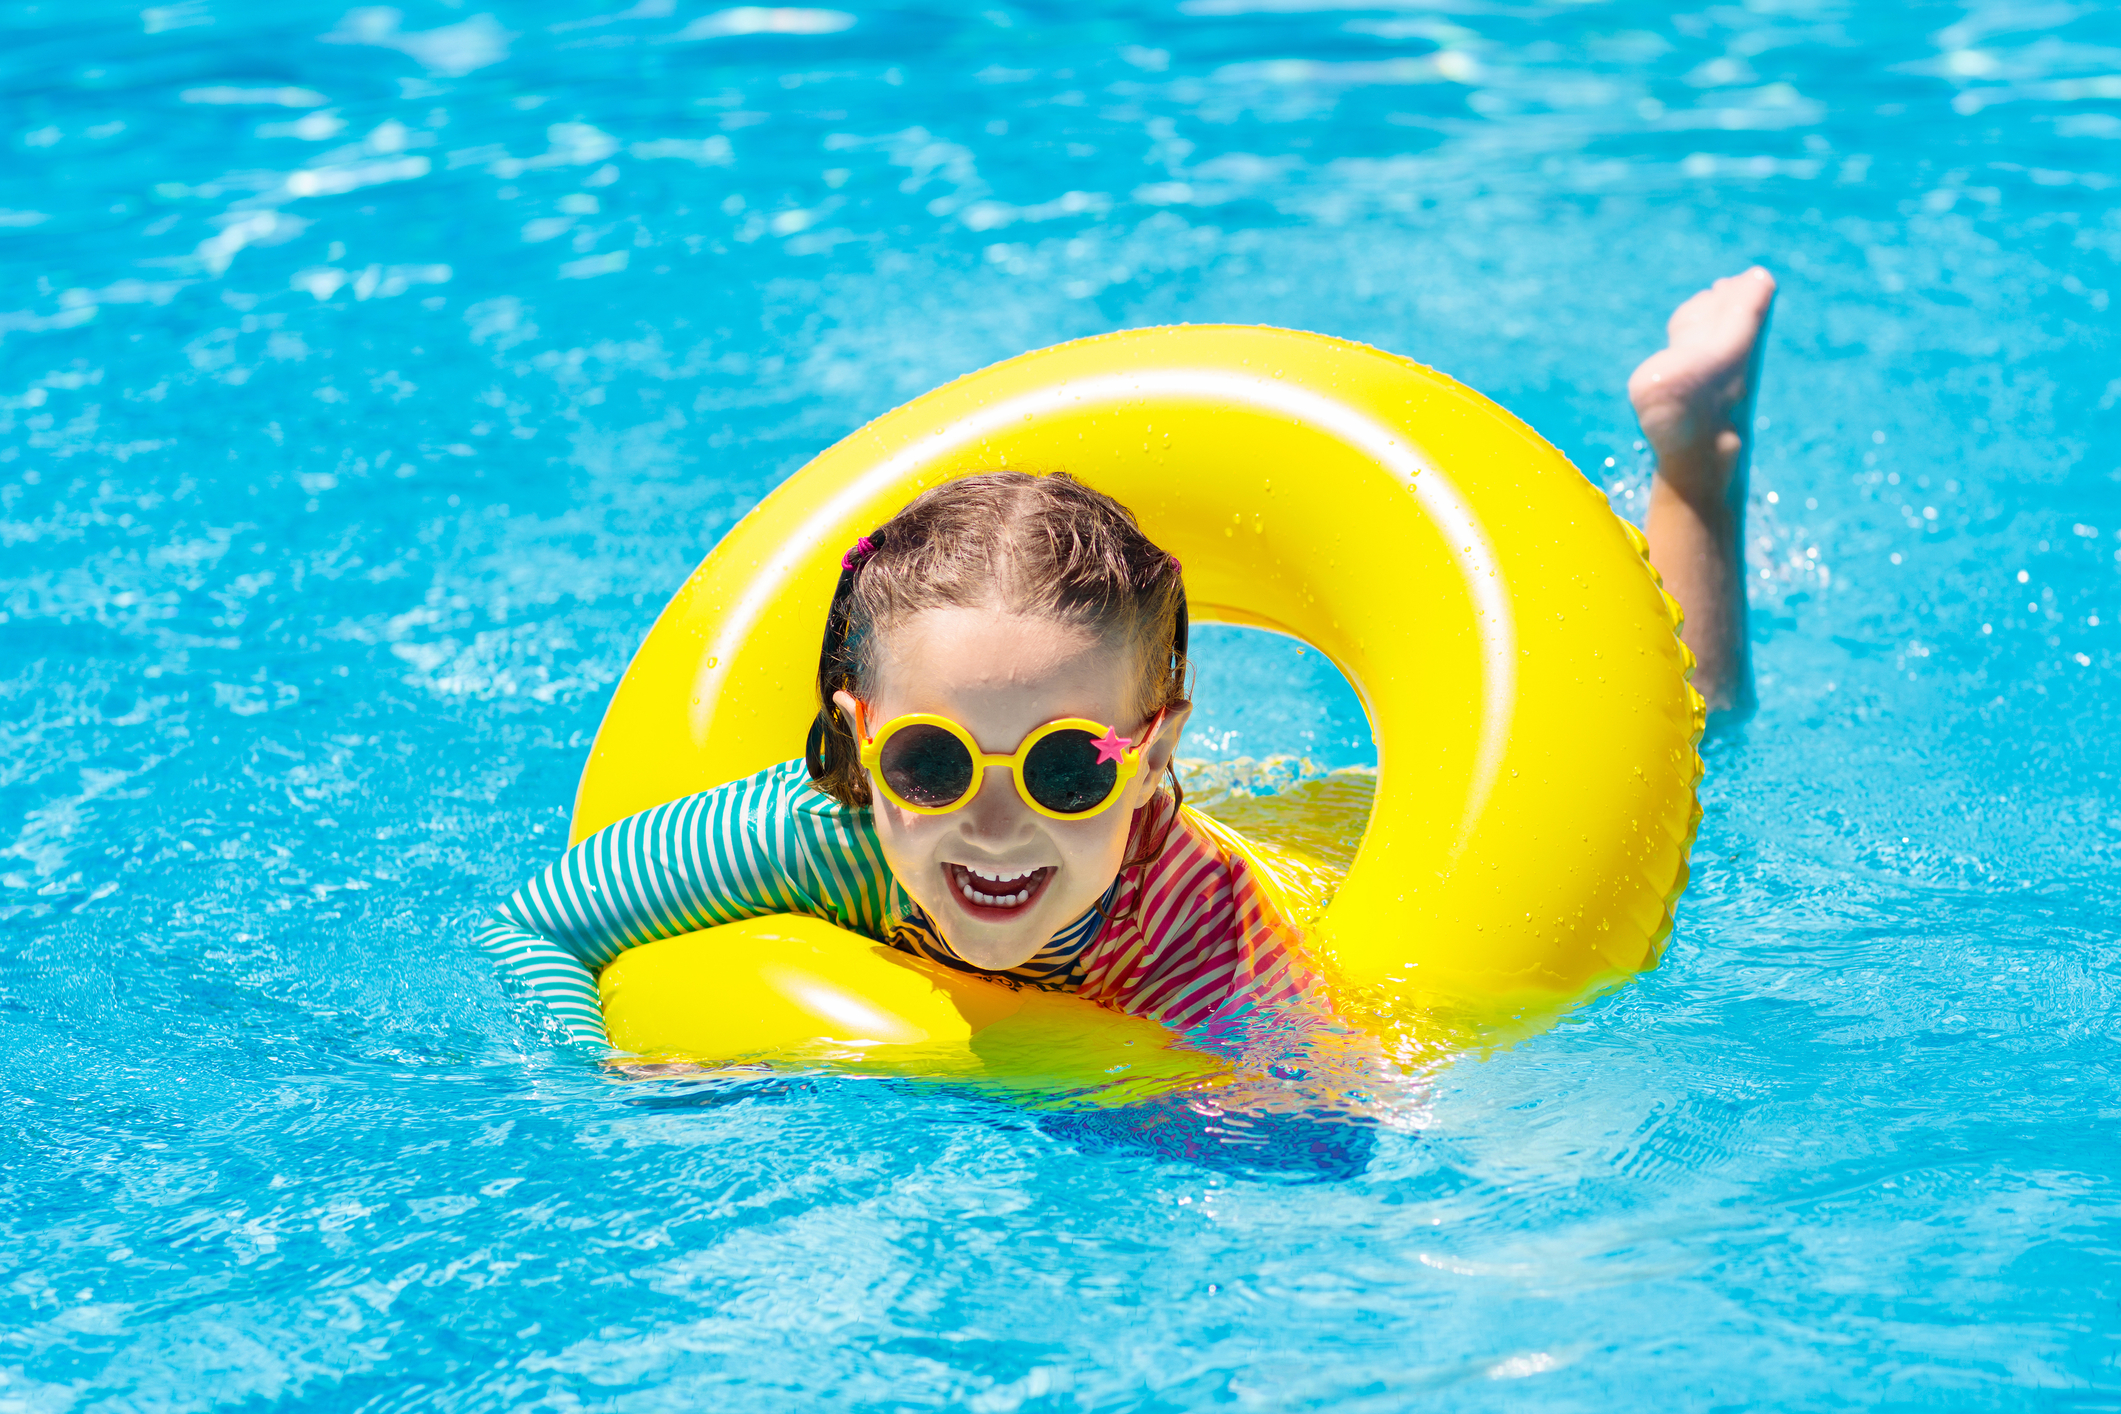 Get a Swimming Pool to Boost Your Summer Fun